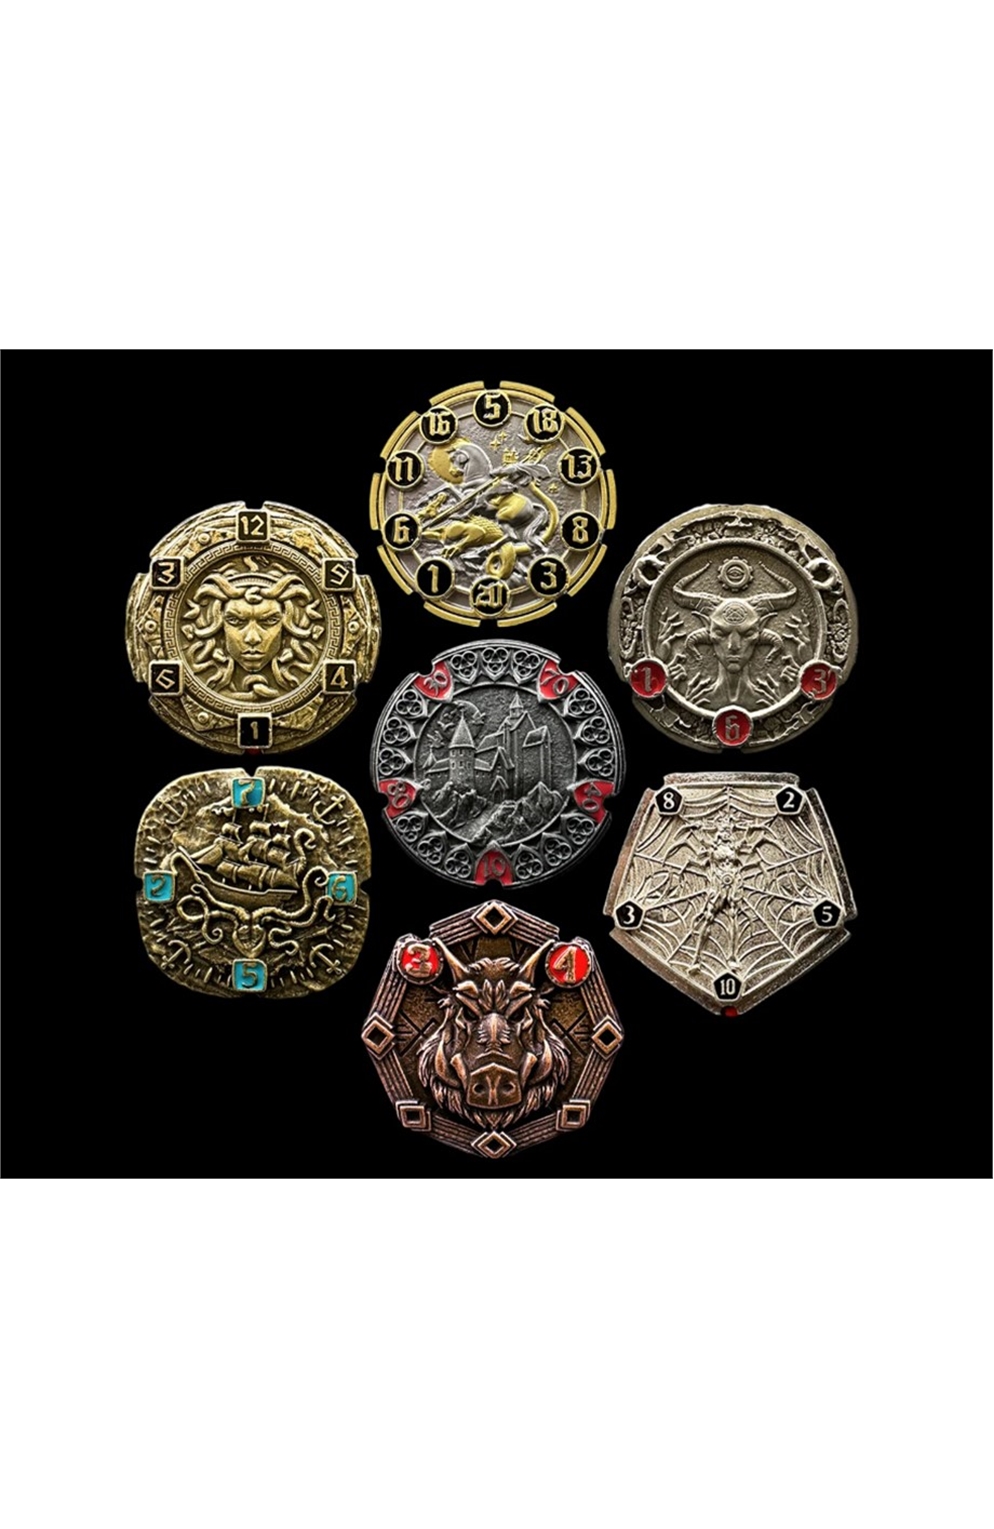 Flipdie: Seven Realms Dice 7 Coin Set